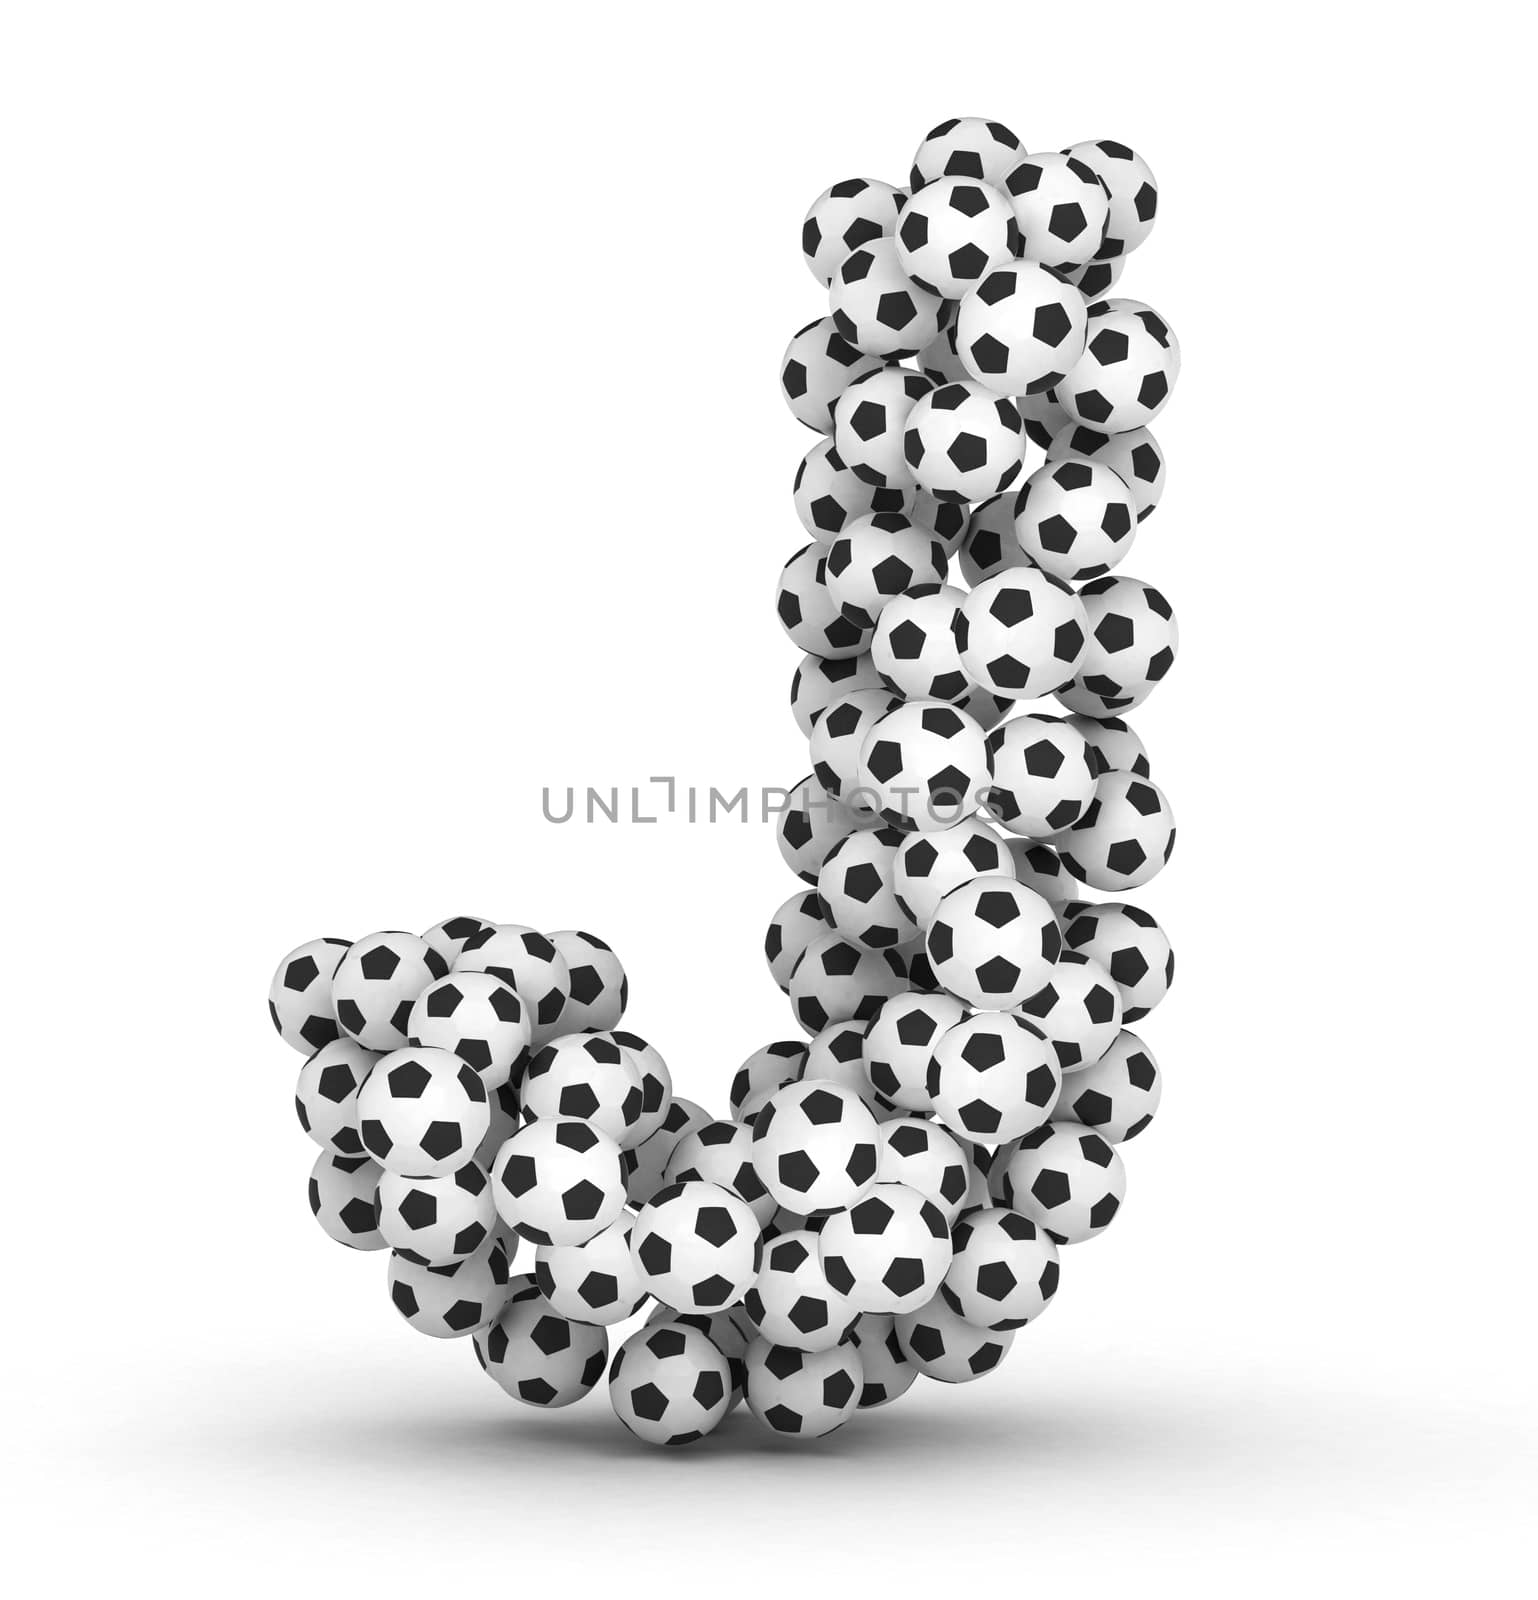 Letter J from soccer football balls by iunewind